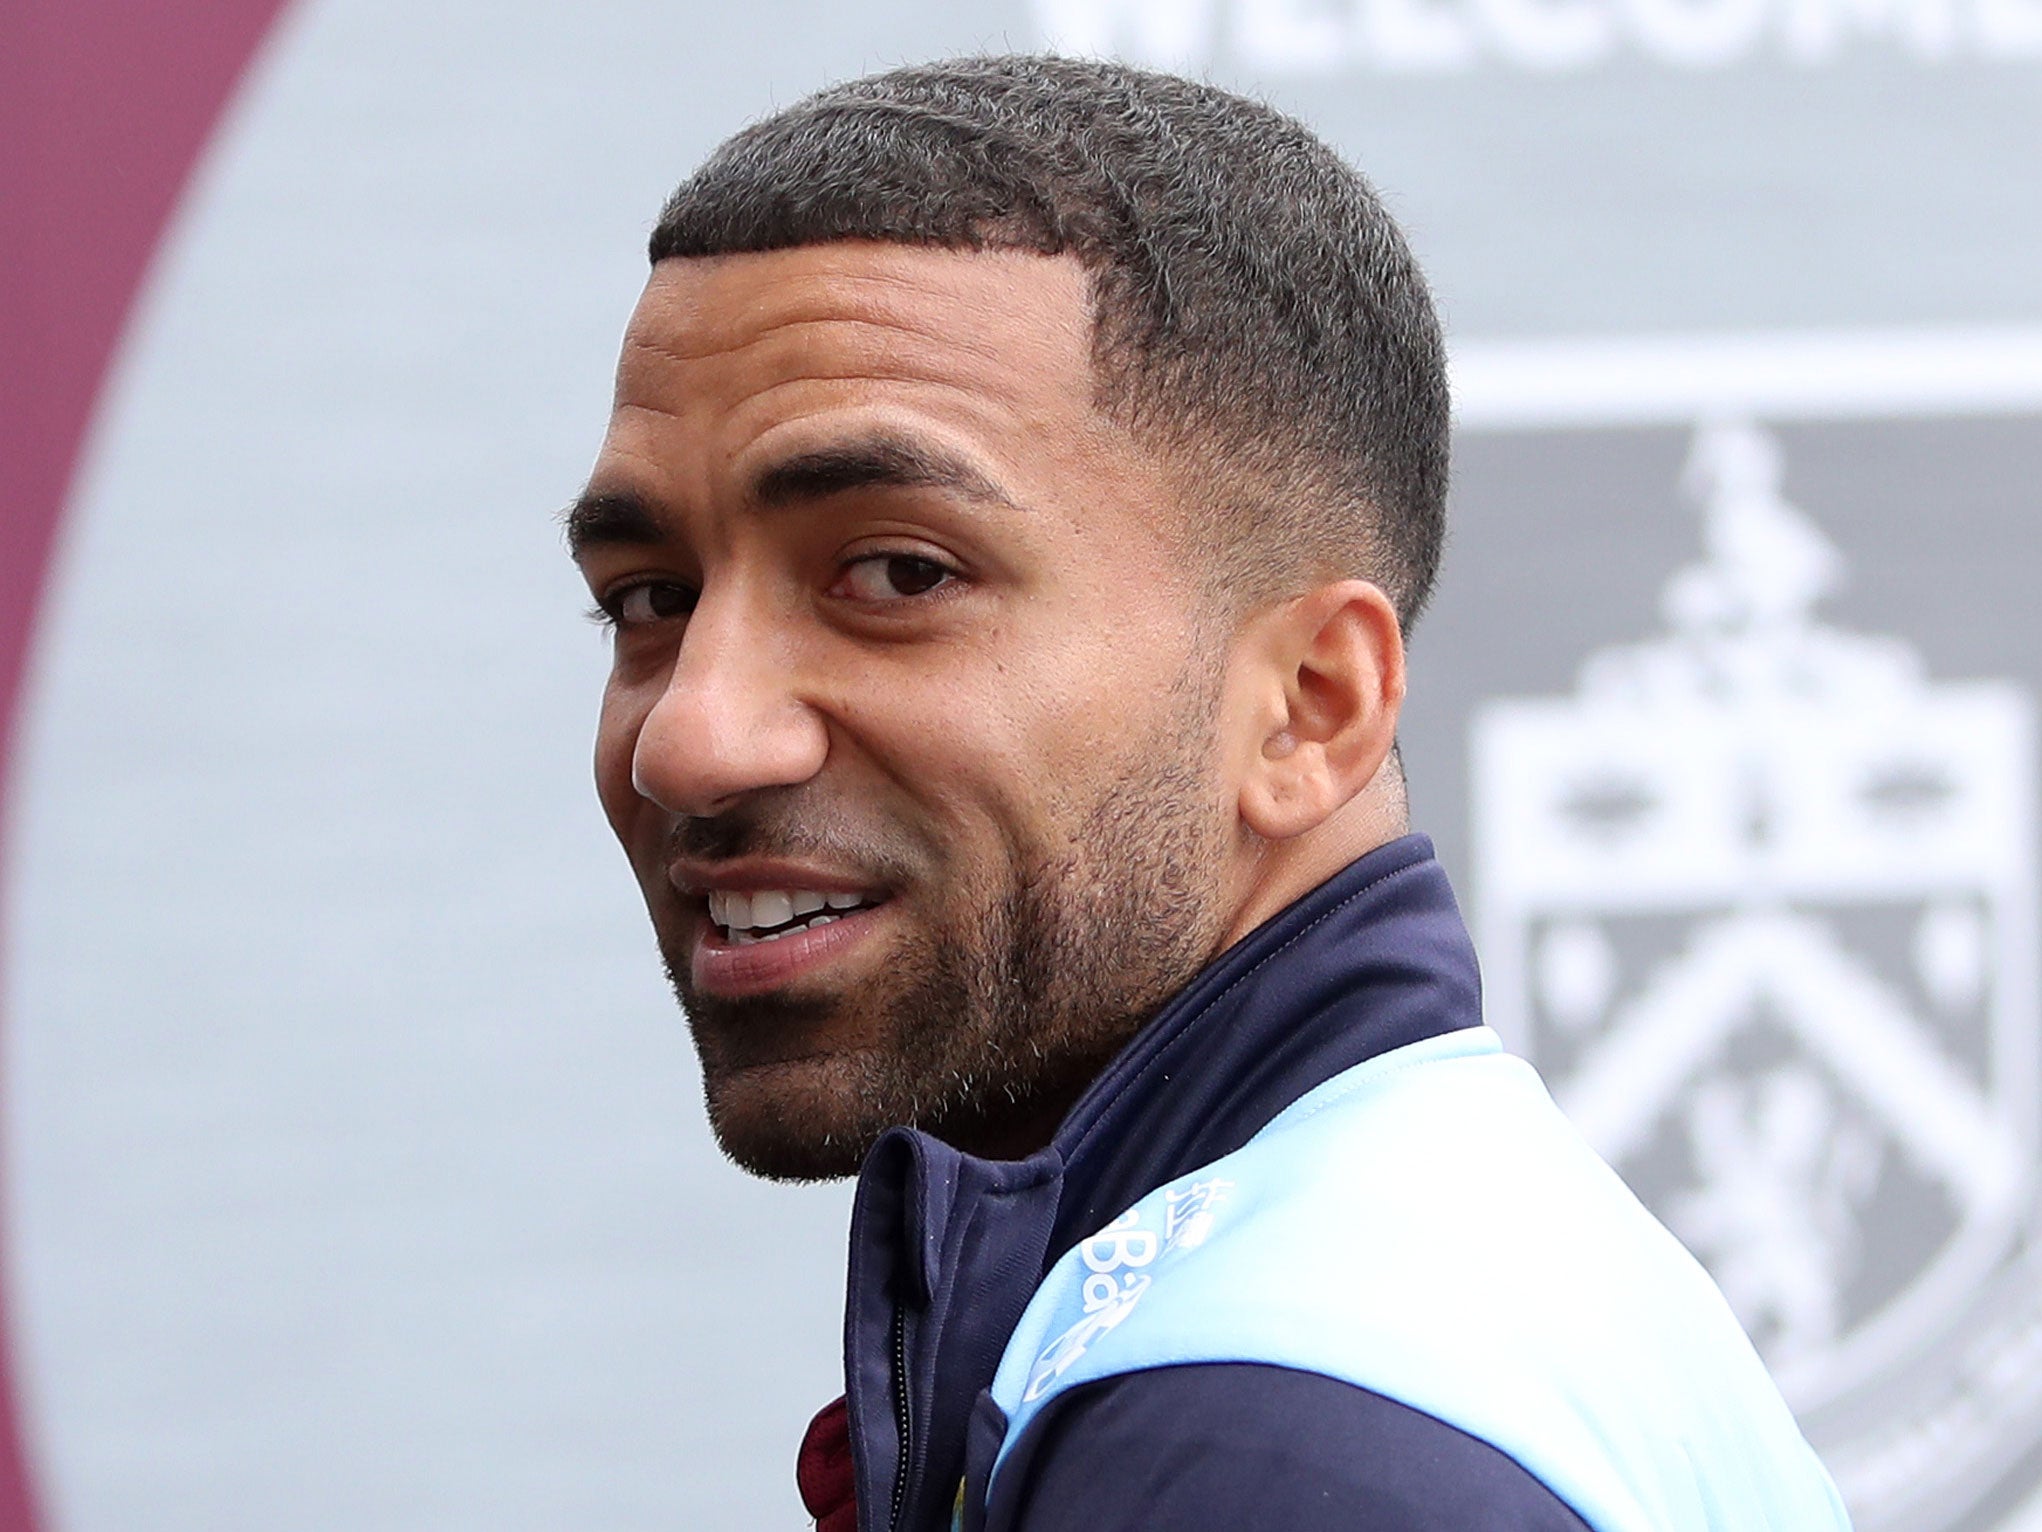 Sport needs more of those brave figures like Aaron Lennon to share their experiences and challenge the stigma surrounding mental health